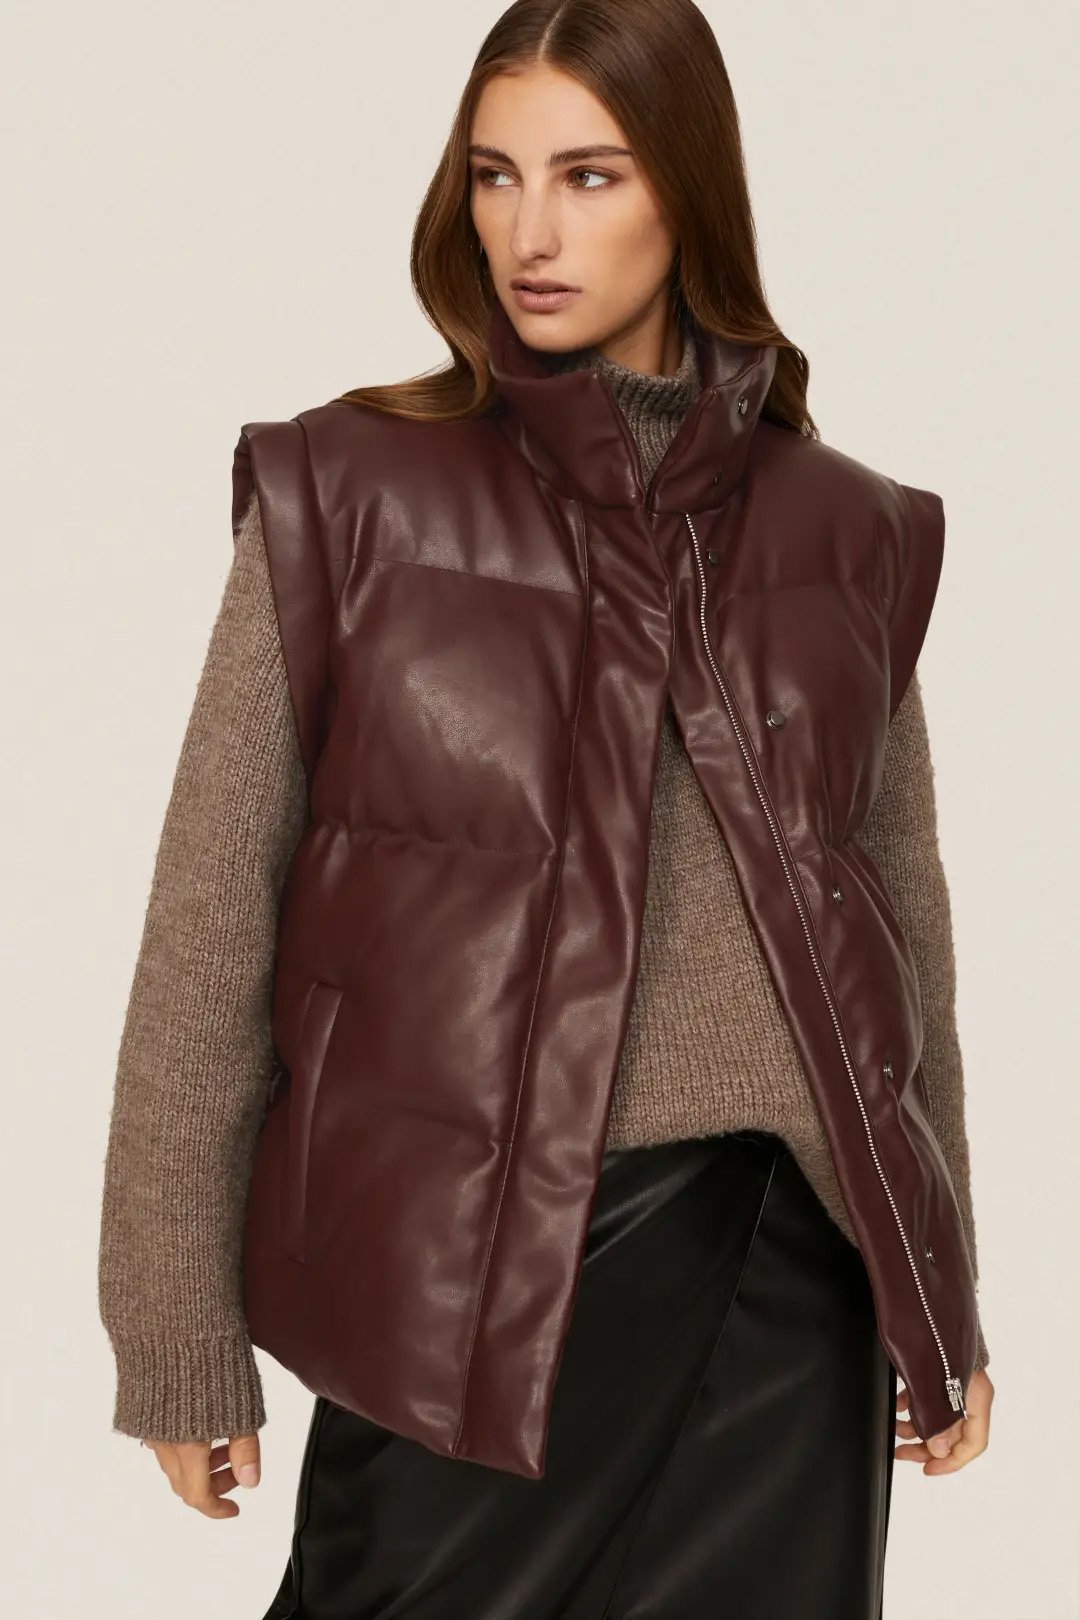 Peter Som Rent the Runway Puffer Vest Leather